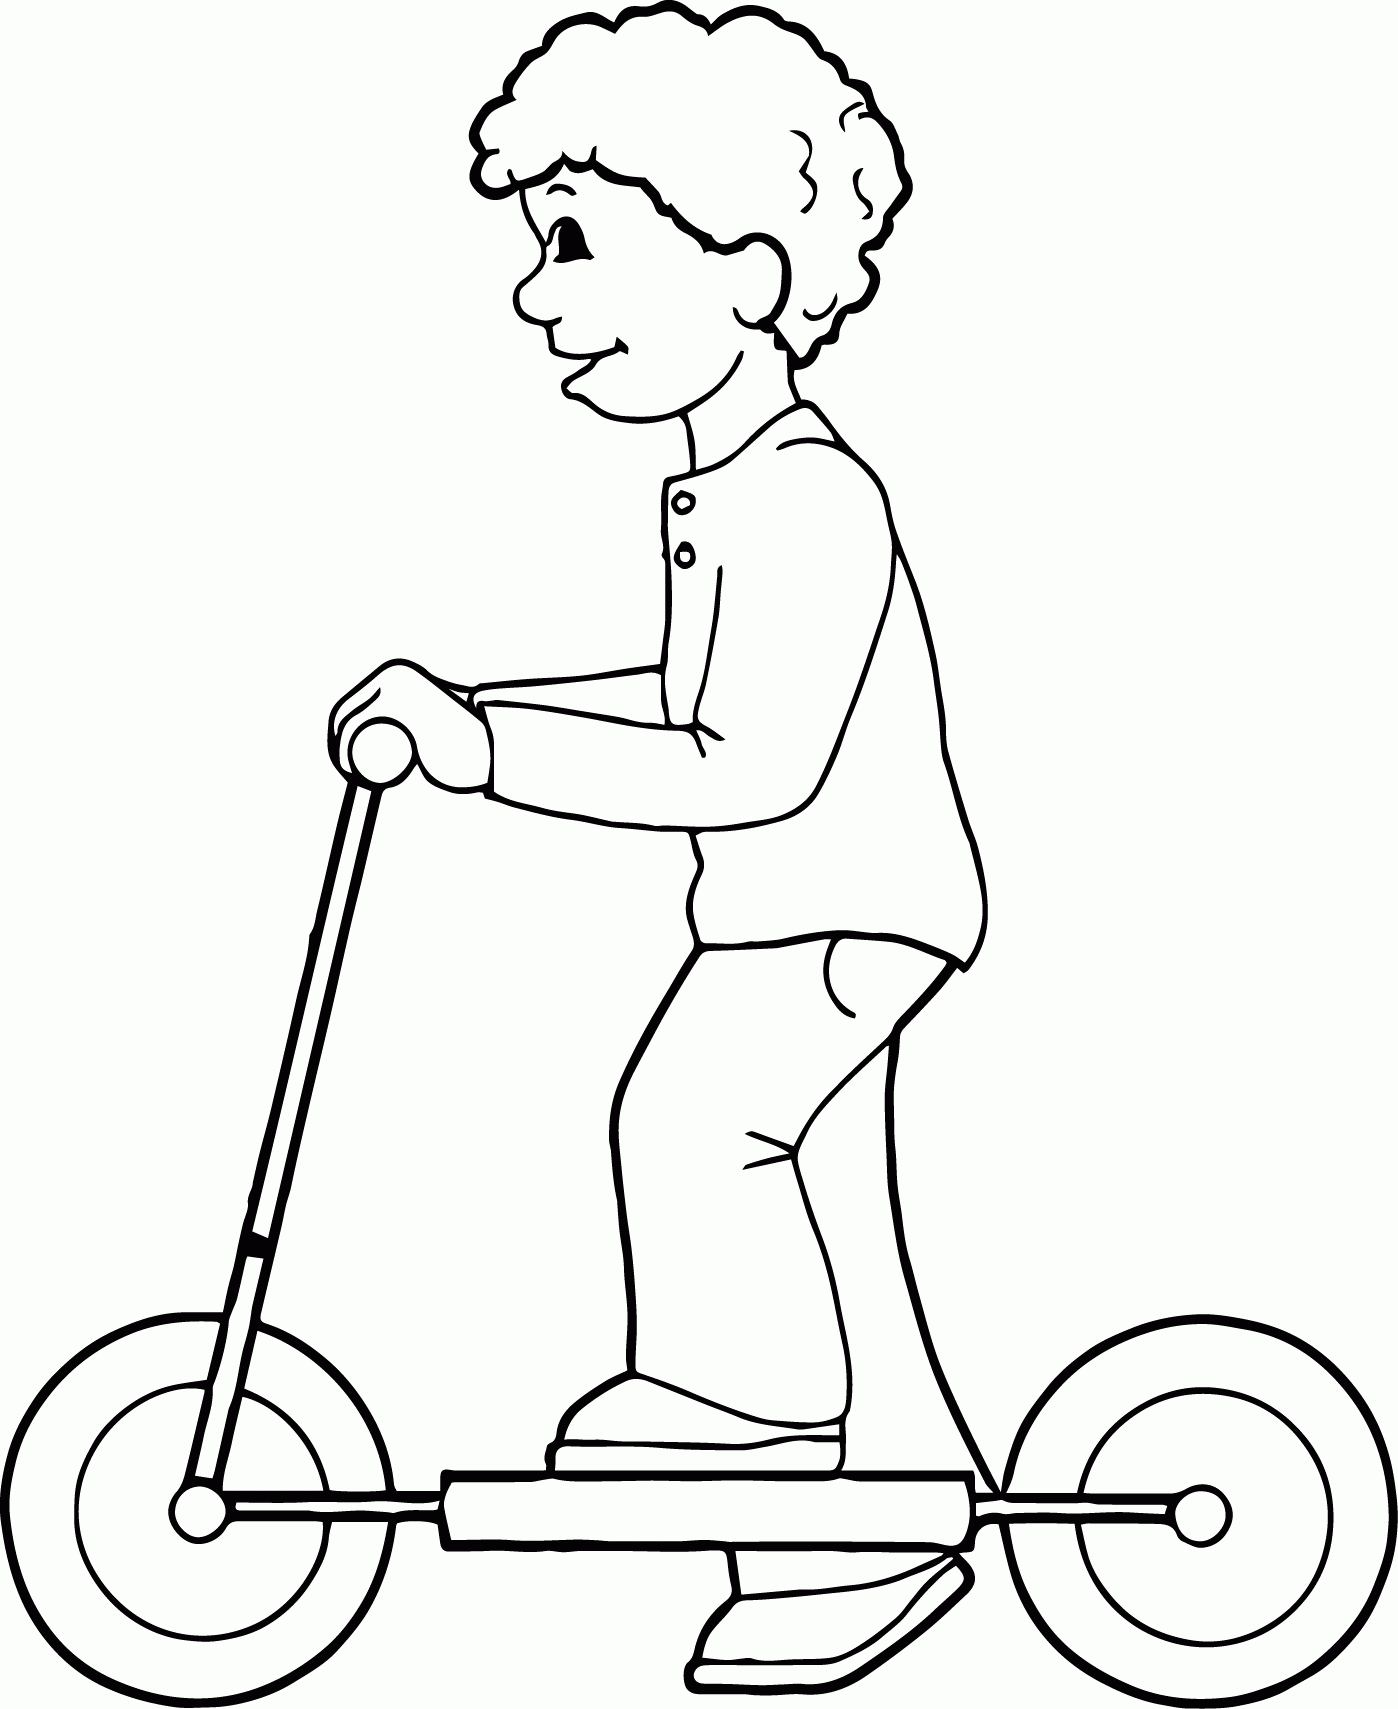 Children Play Biycle Coloring Page | Wecoloringpage